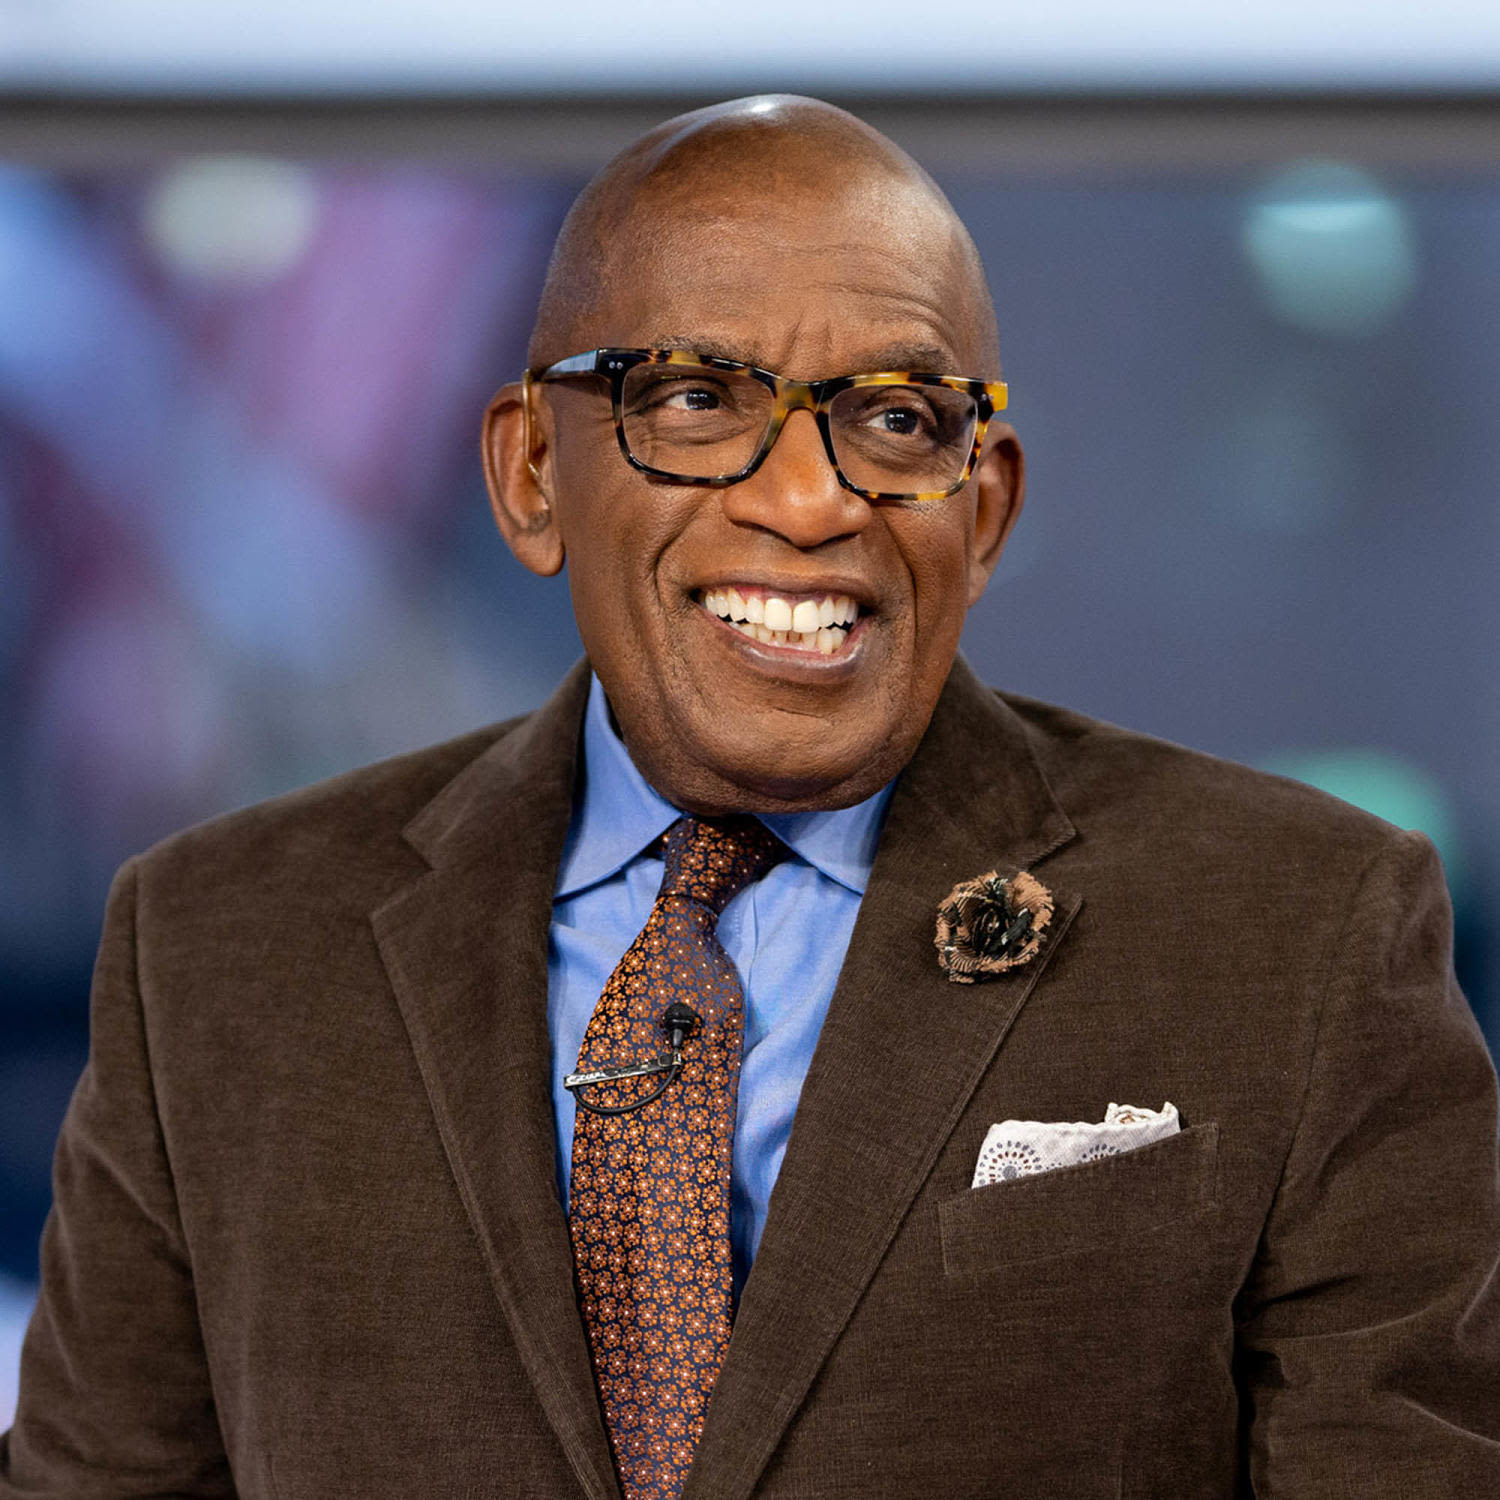 Al Roker reviews Chicago’s Mr. Beef, the restaurant that inspired ‘The Bear’